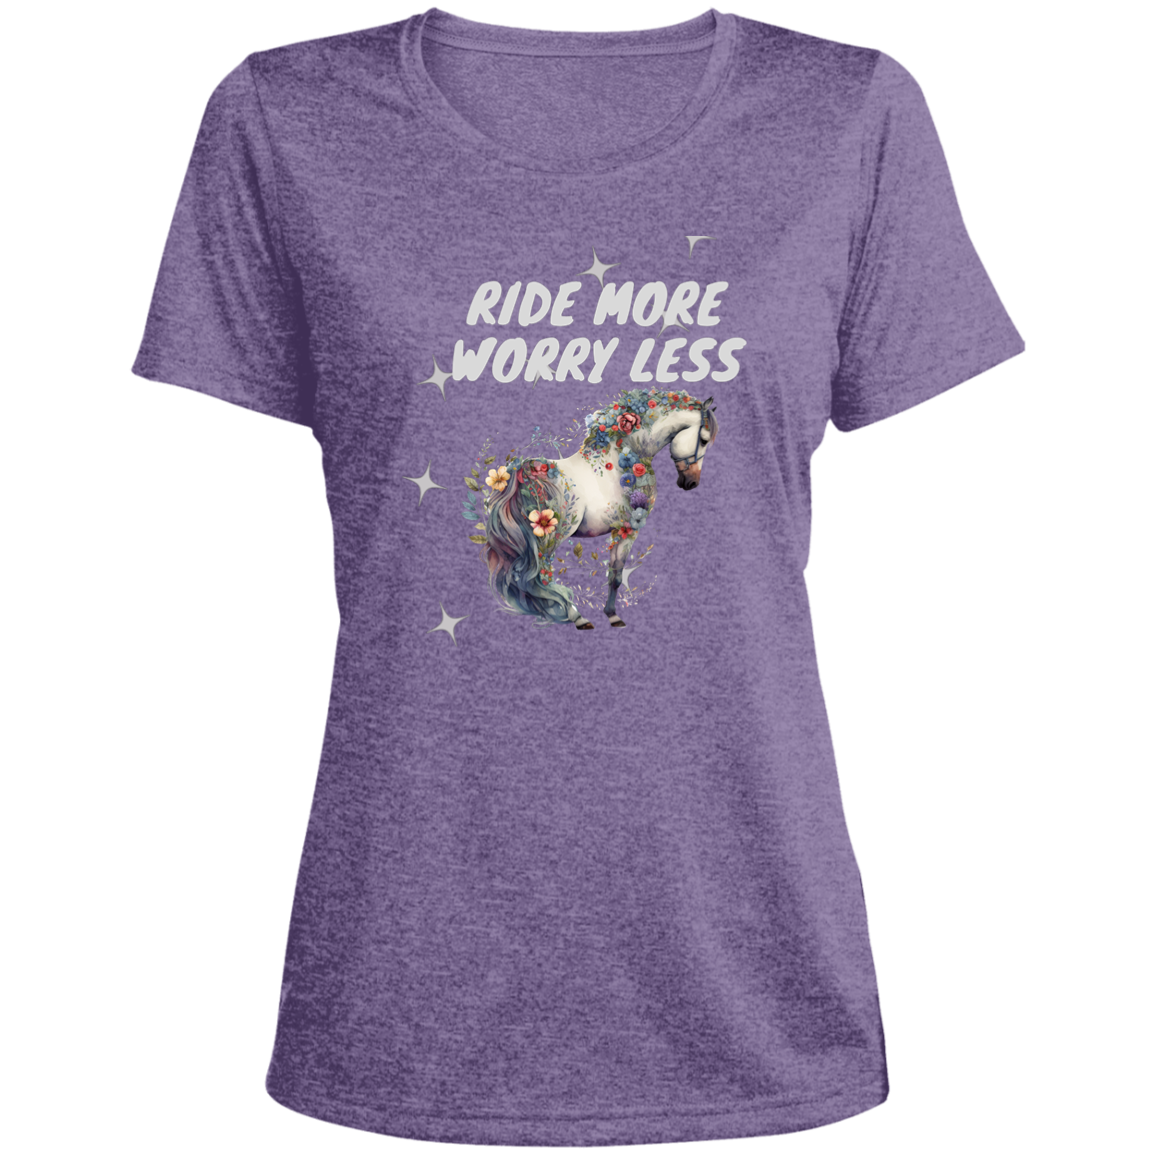 Ride More Worry Less Women's T-Shirt, Gift Idea, Mother's Day, Birthday, Special Occasion, Just For You Gift - MyAllOutHorses